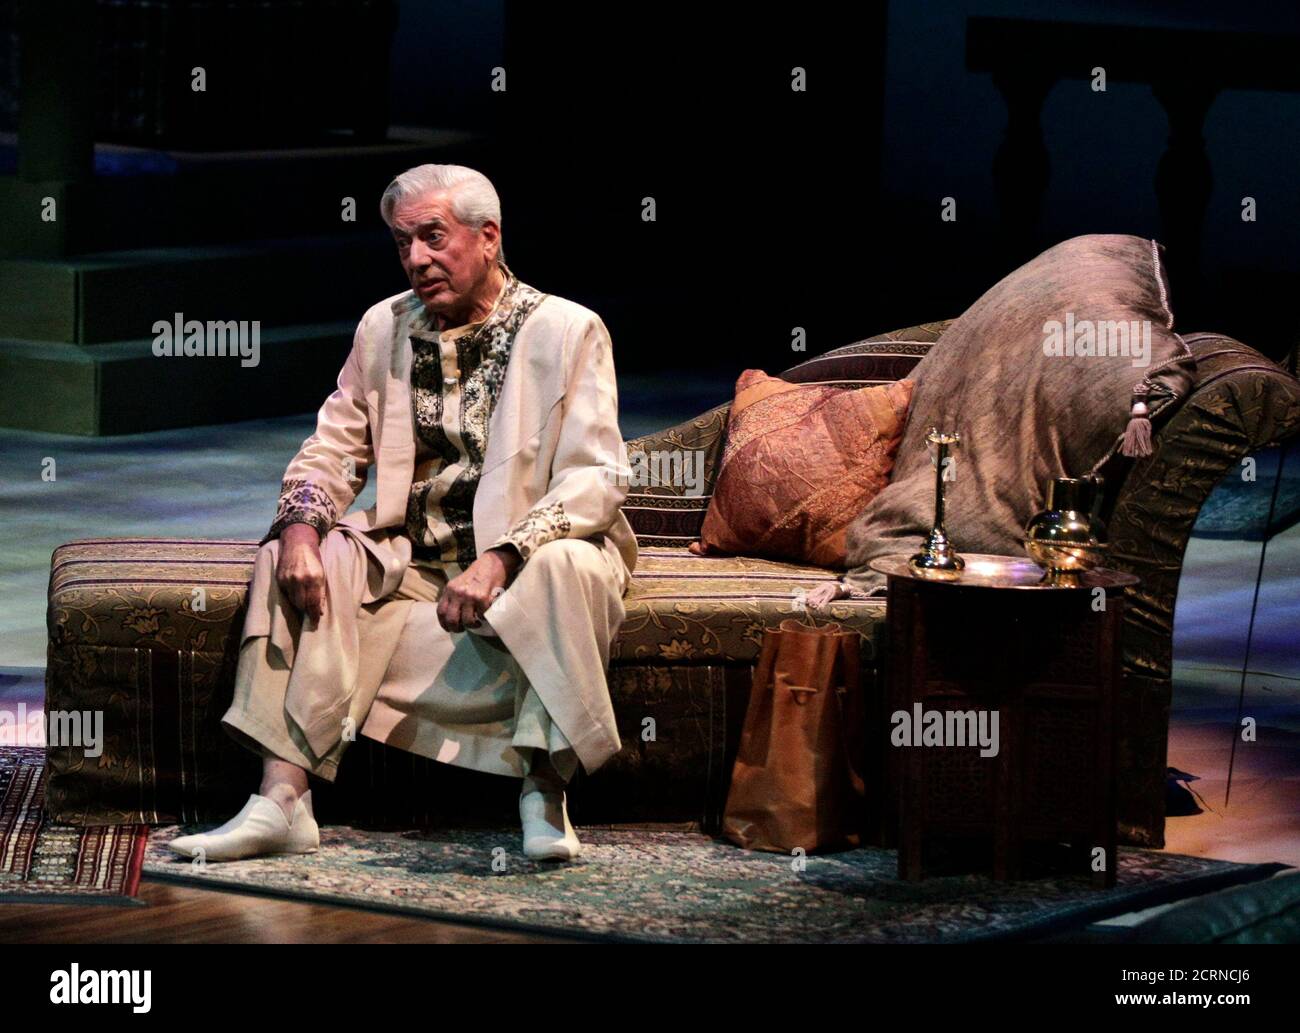 Peruvian-born literature Nobel laureate Mario Vargas Llosa  performs a new theatre adaptation of 'One Thousand and One Nights'at Bellas Artes museum in Mexico City March 5, 2011.  The play runs on March 5 and 6. REUTERS/Henry Romero (MEXICO - Tags: ENTERTAINMENT) Stock Photo